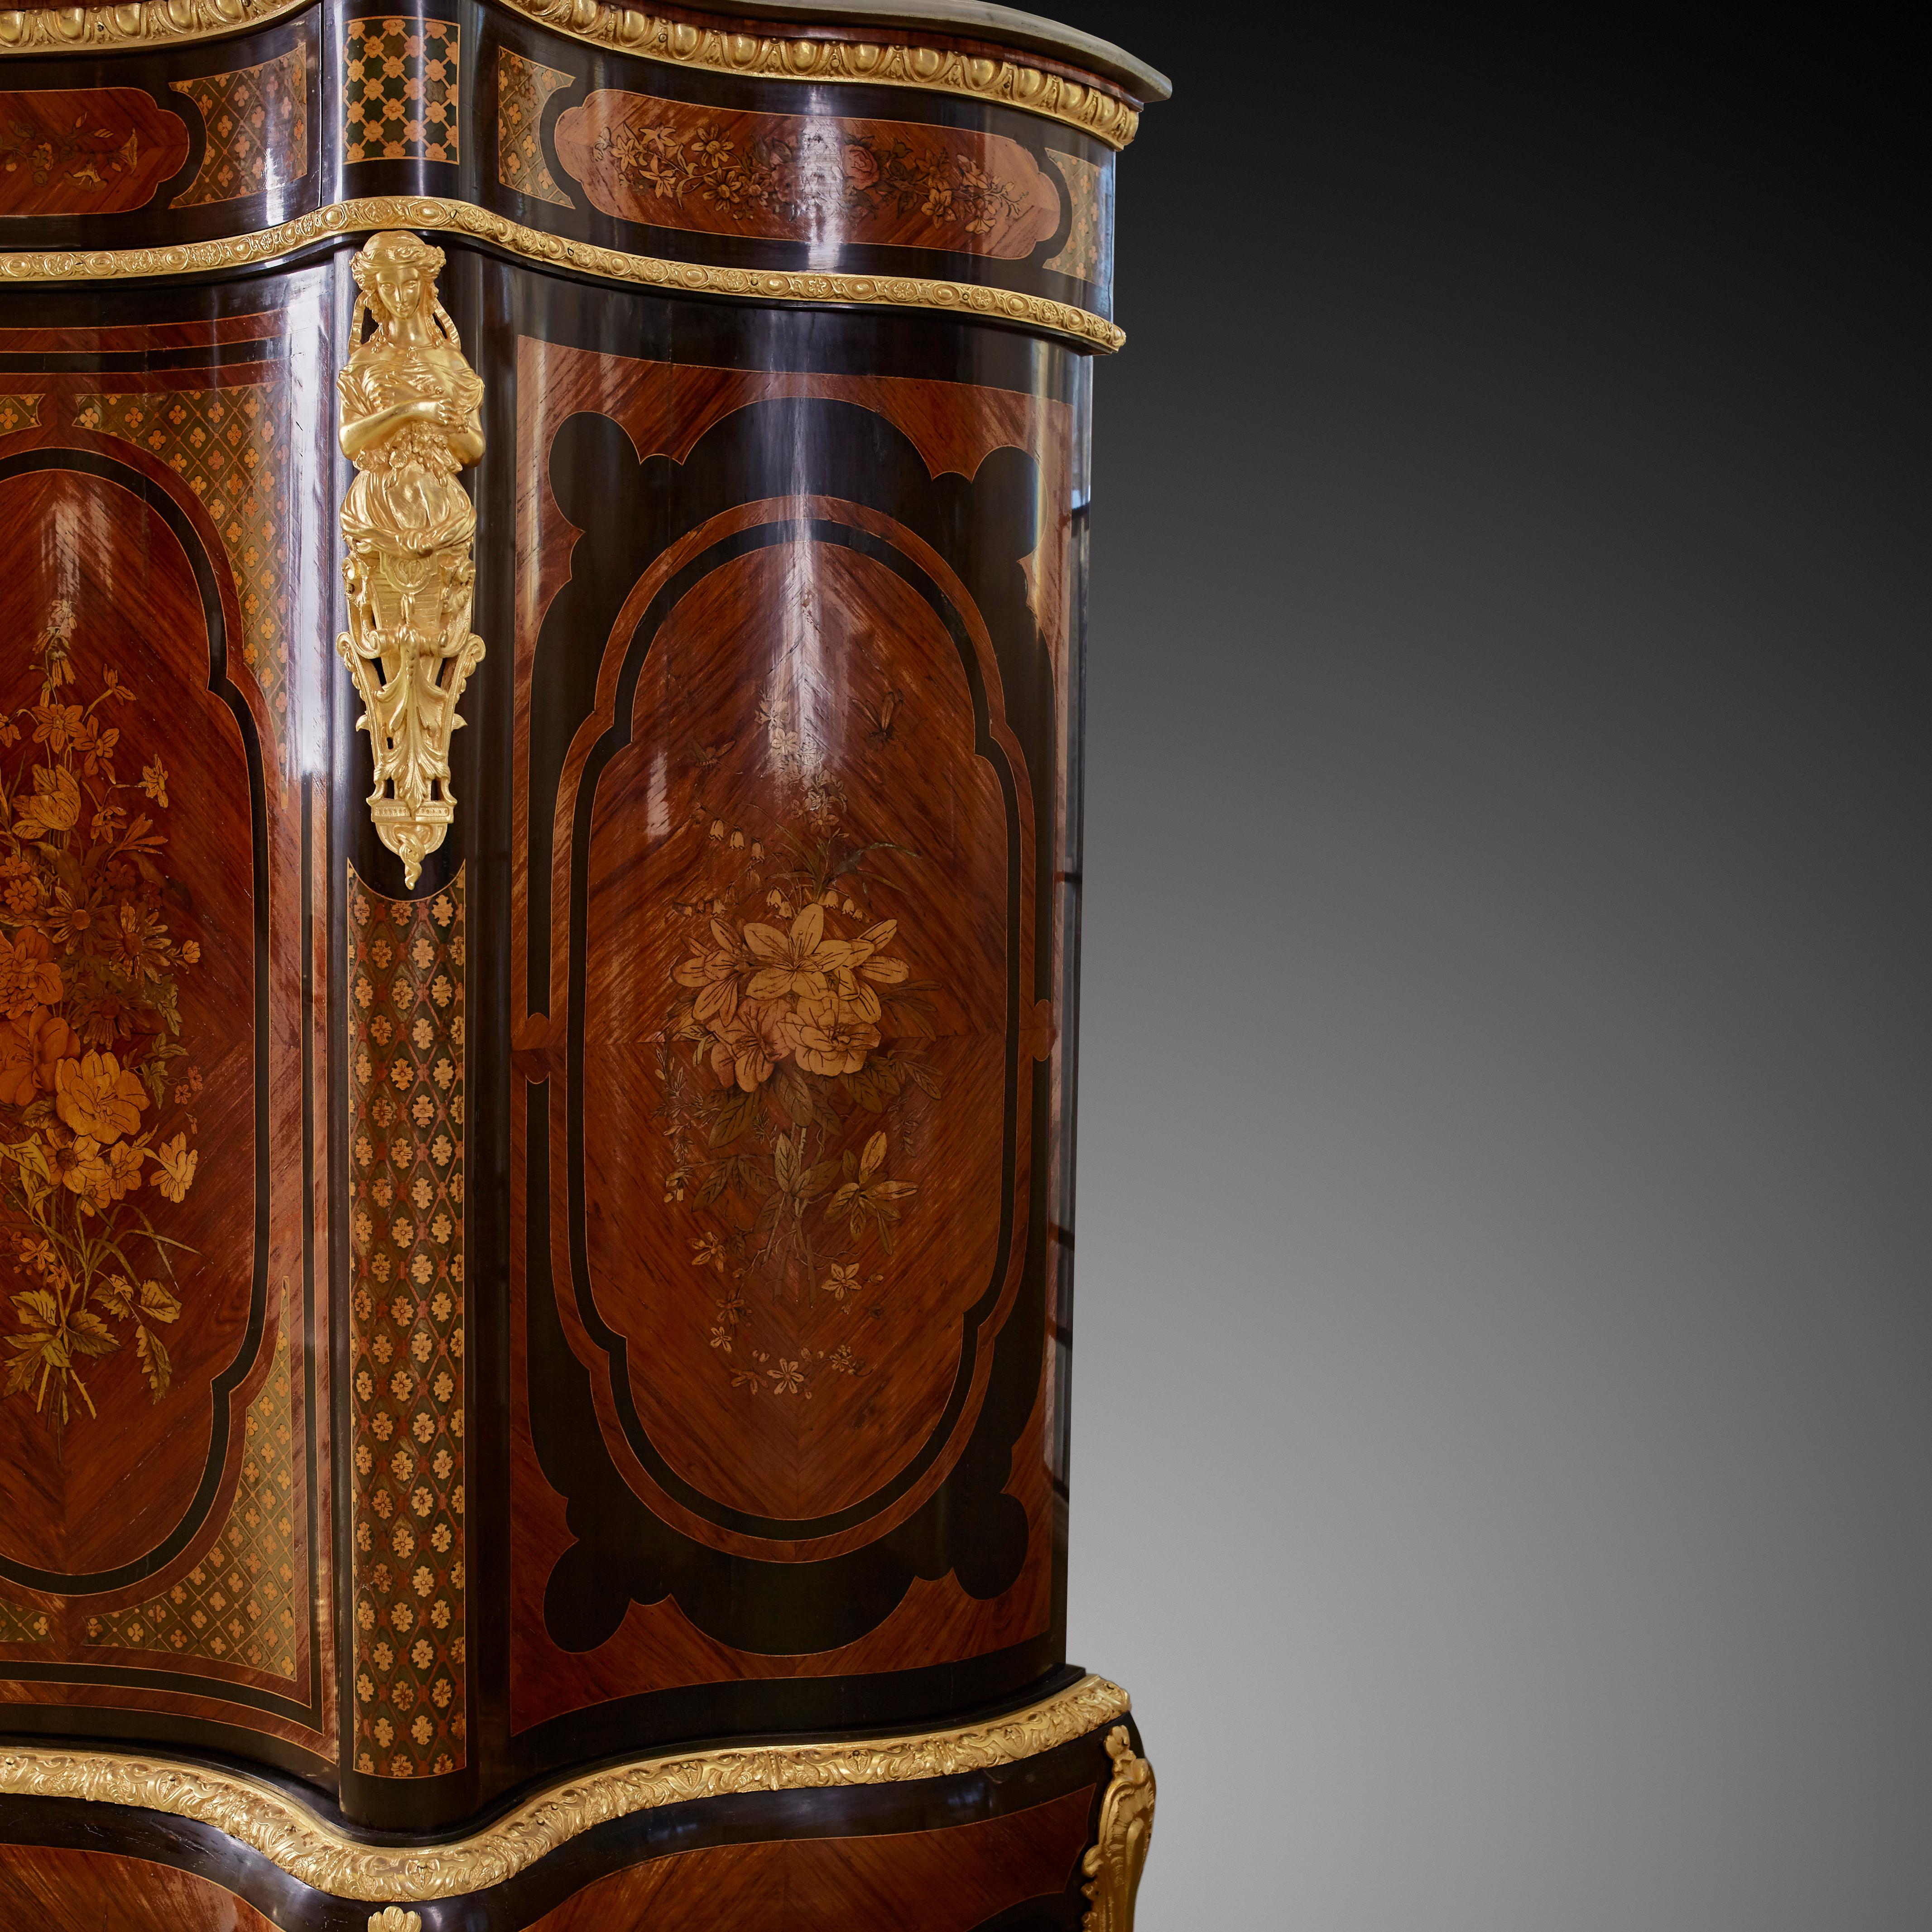 Alexander Roux Serpentine Inlaid Side Cabinet’ uses mainly light wood materials such as kingwood or satinwood, and floral motifs to bring a feeling of closeness, friendliness towards nature. The background texture has a classic trellis lattice